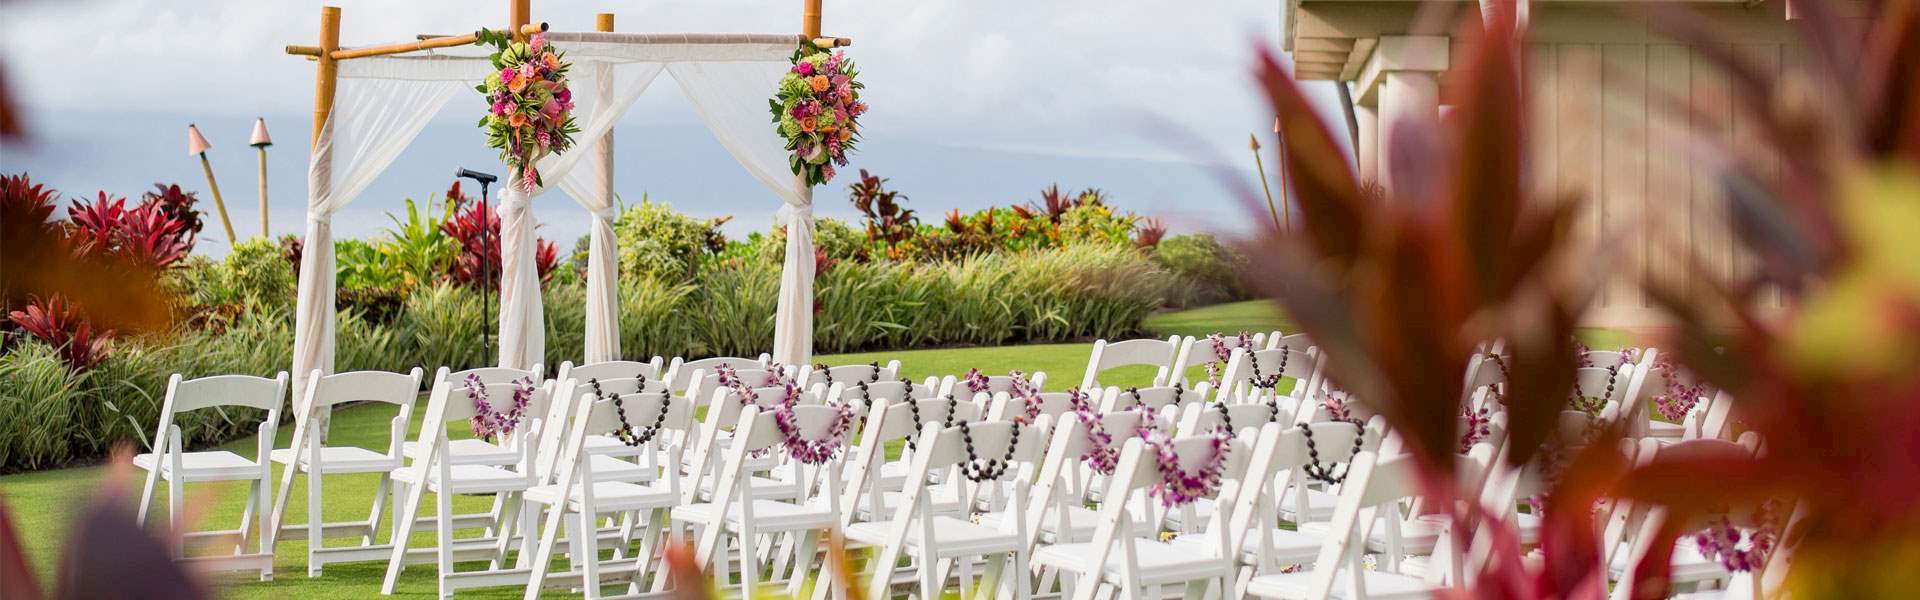 chairs set up on the beach for a wedding ceremony